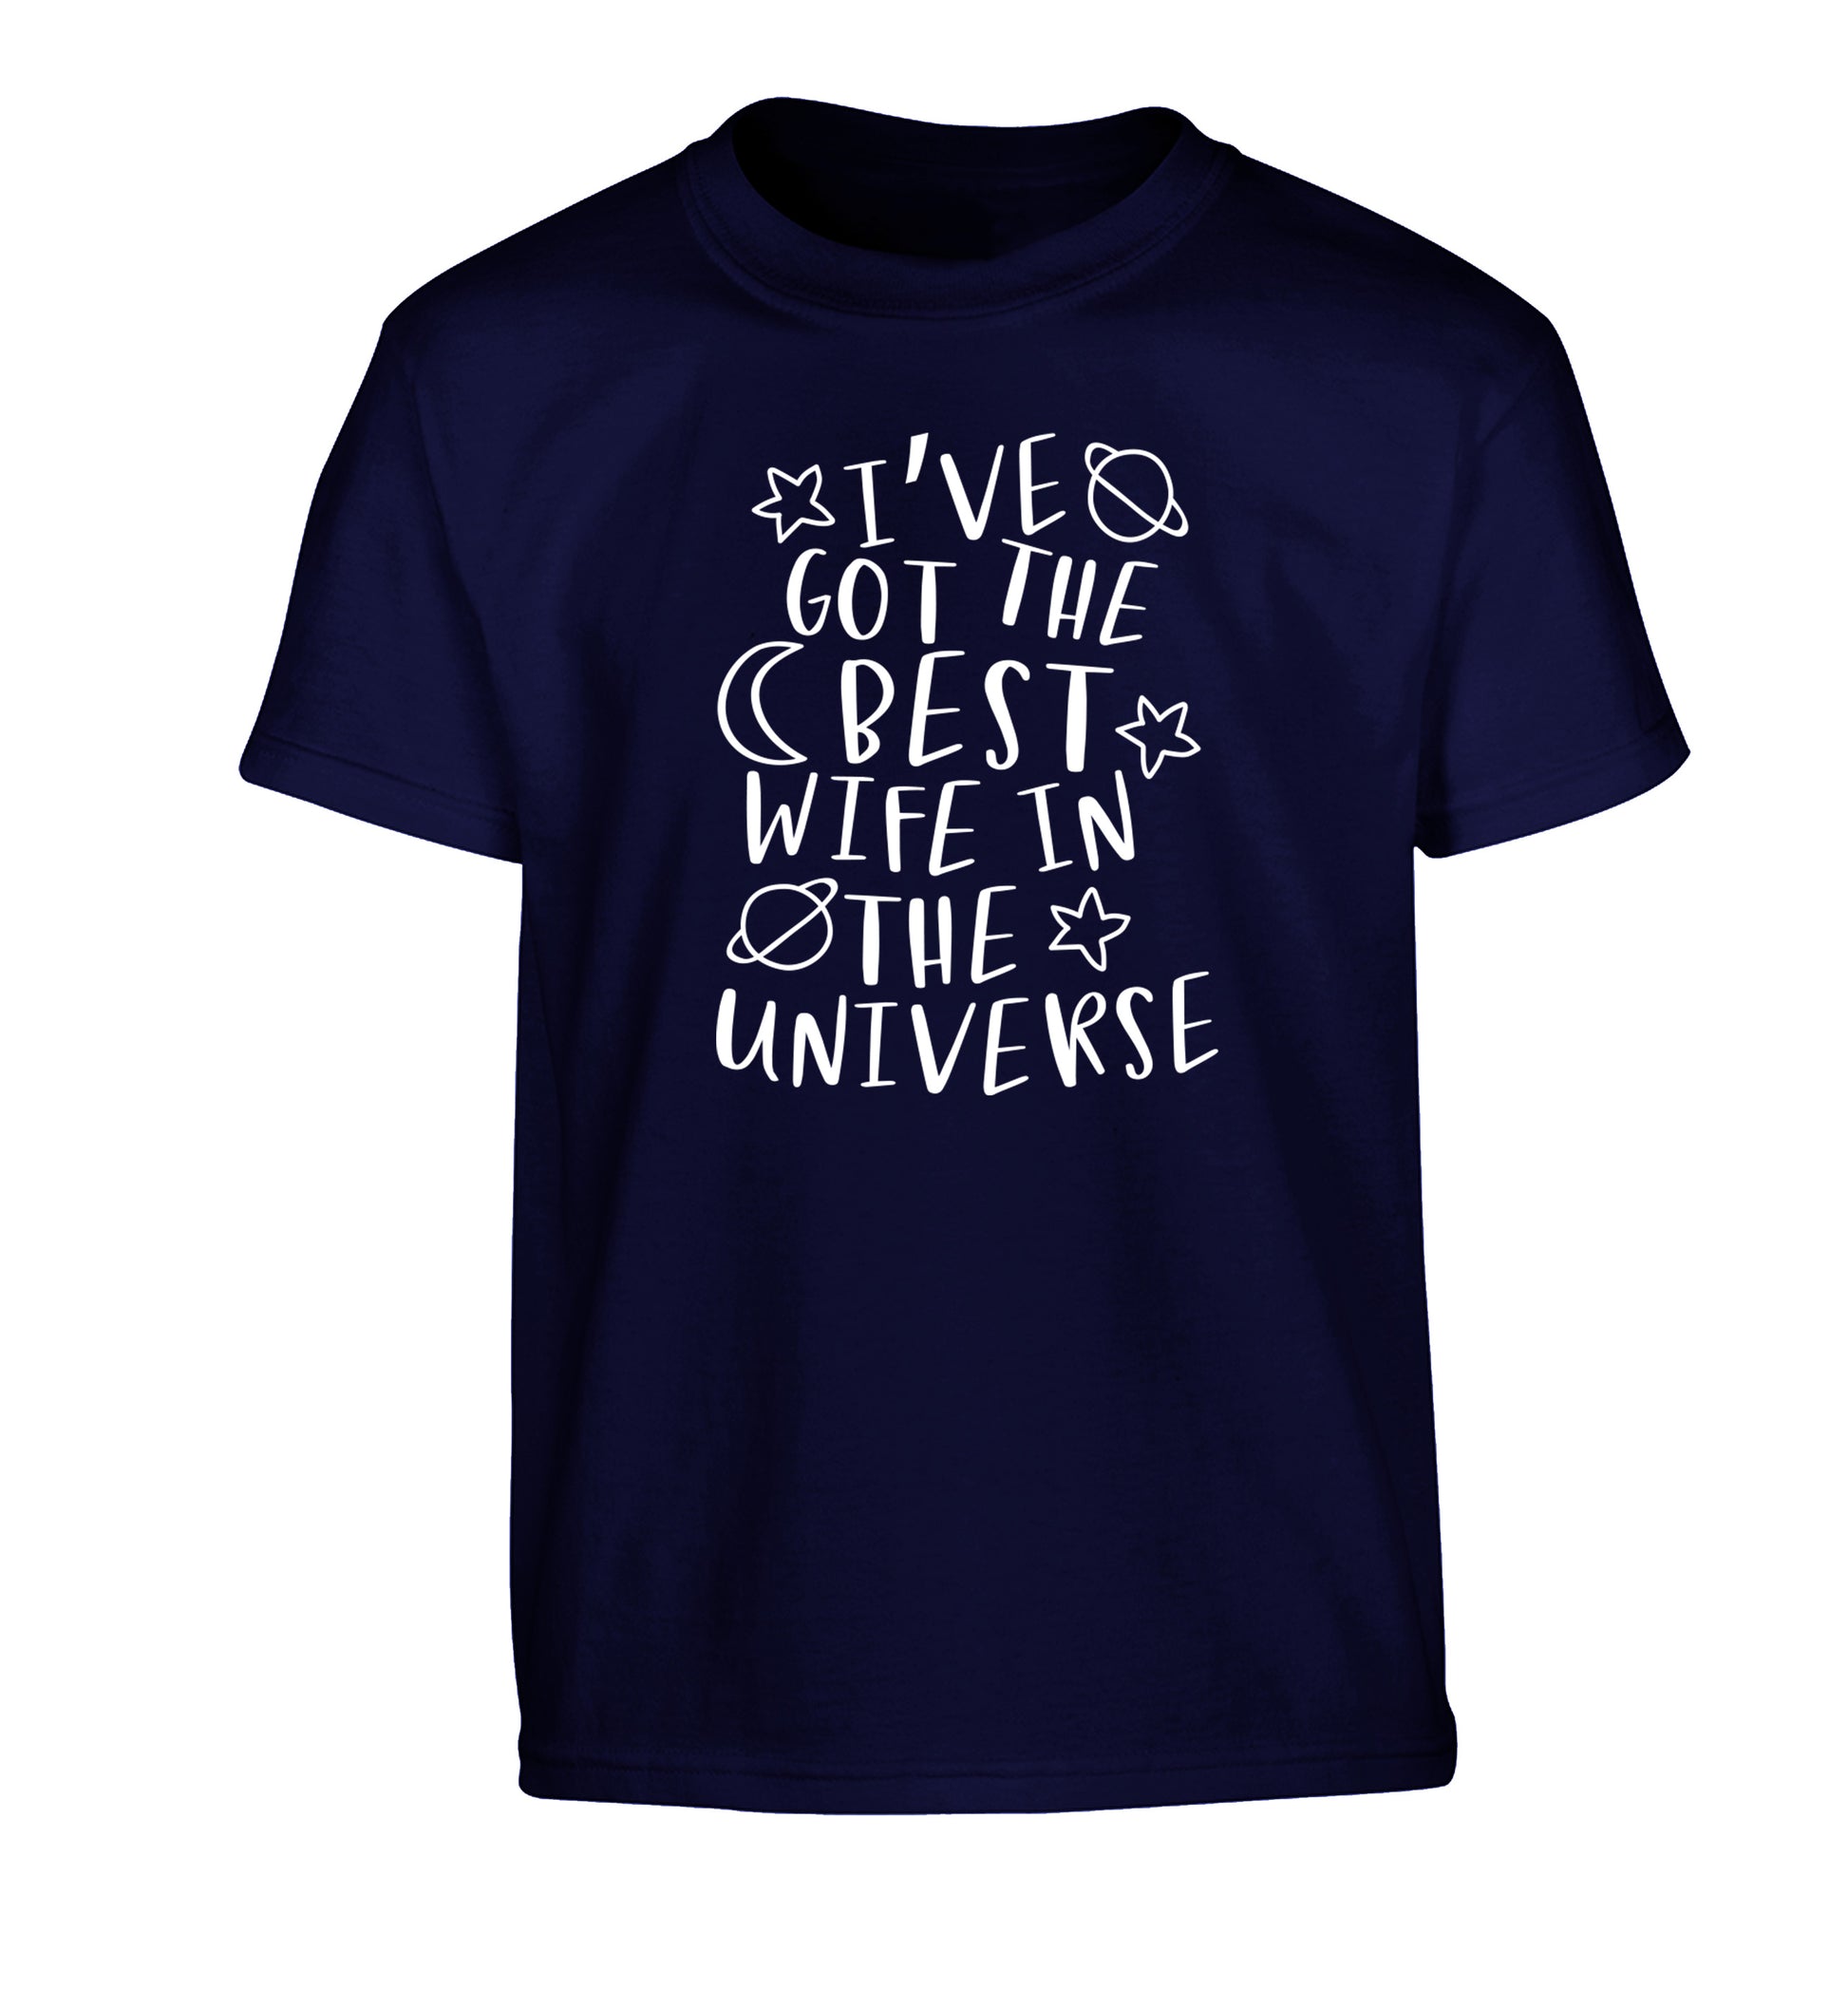 I've got the best wife in the universe Children's navy Tshirt 12-13 Years